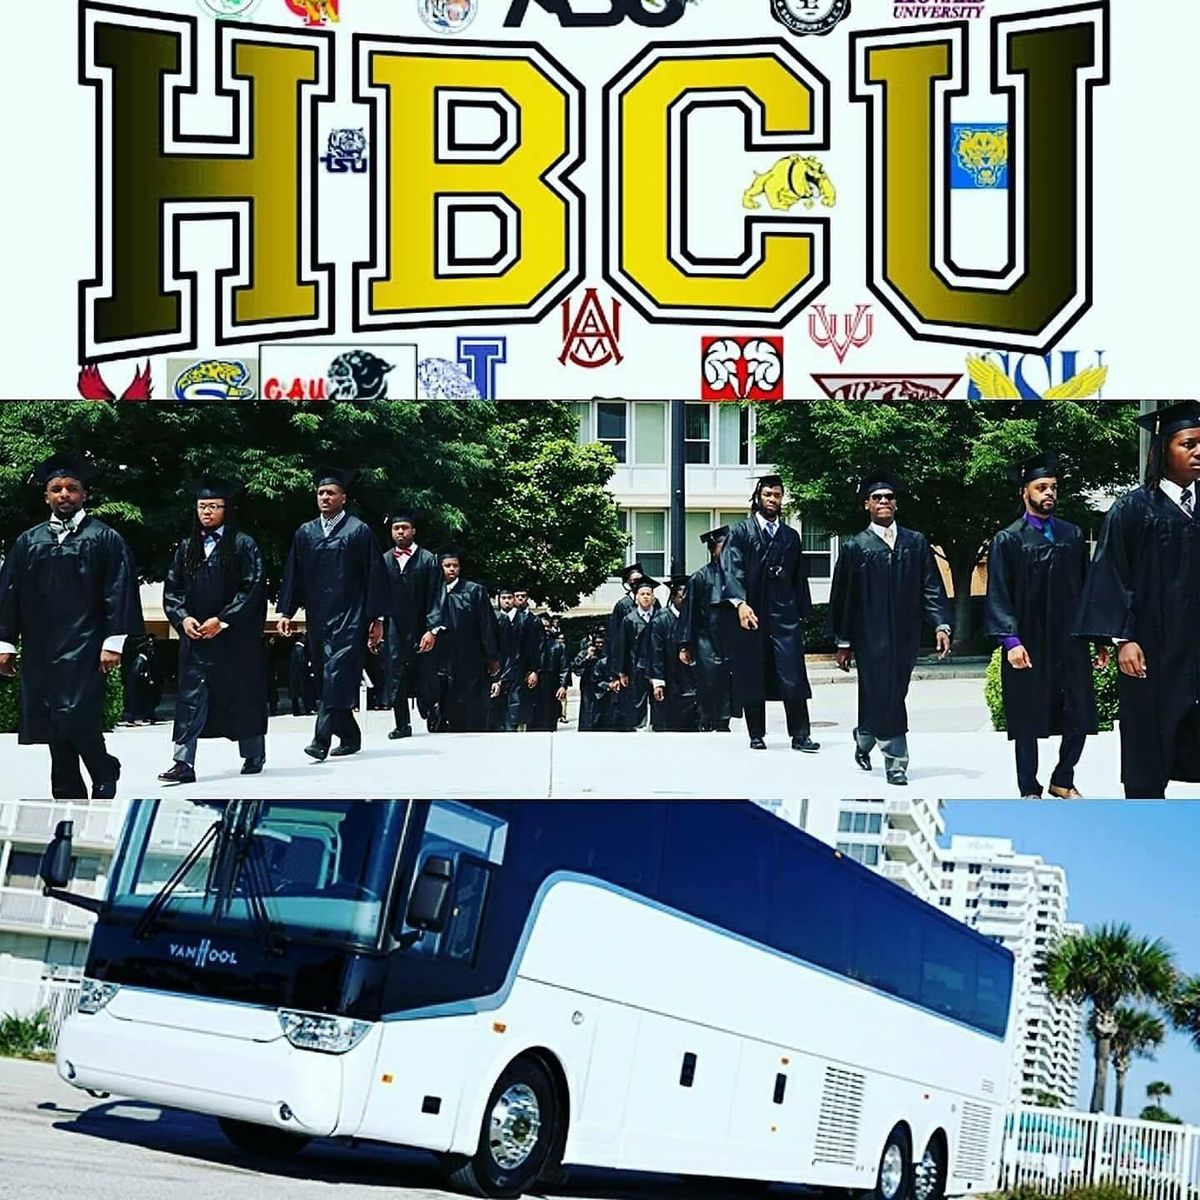 Chasing Your Education HBCU College Bus Tour